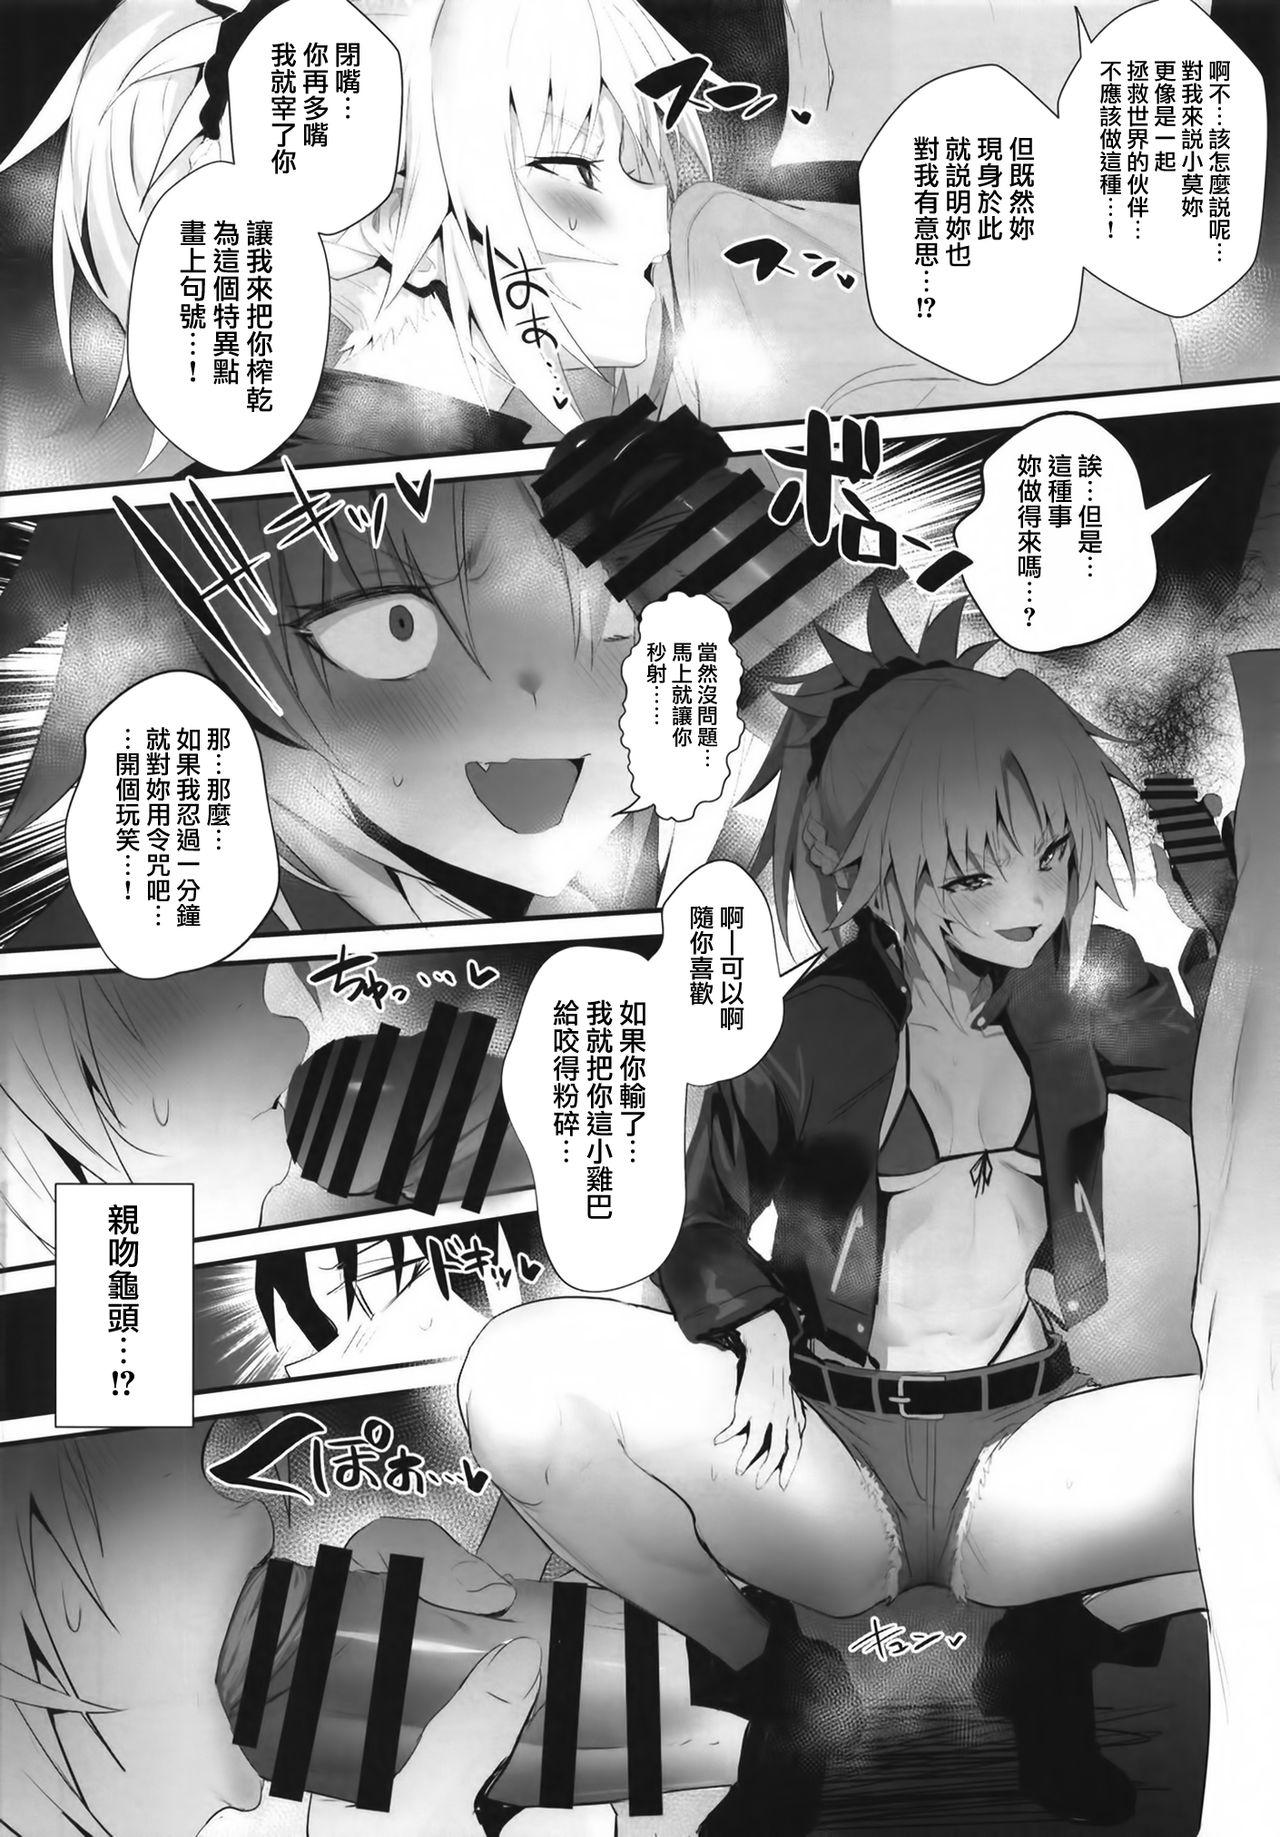 Unshaved SUKEBE Order VOL. 02 - Fate grand order Exposed - Page 4